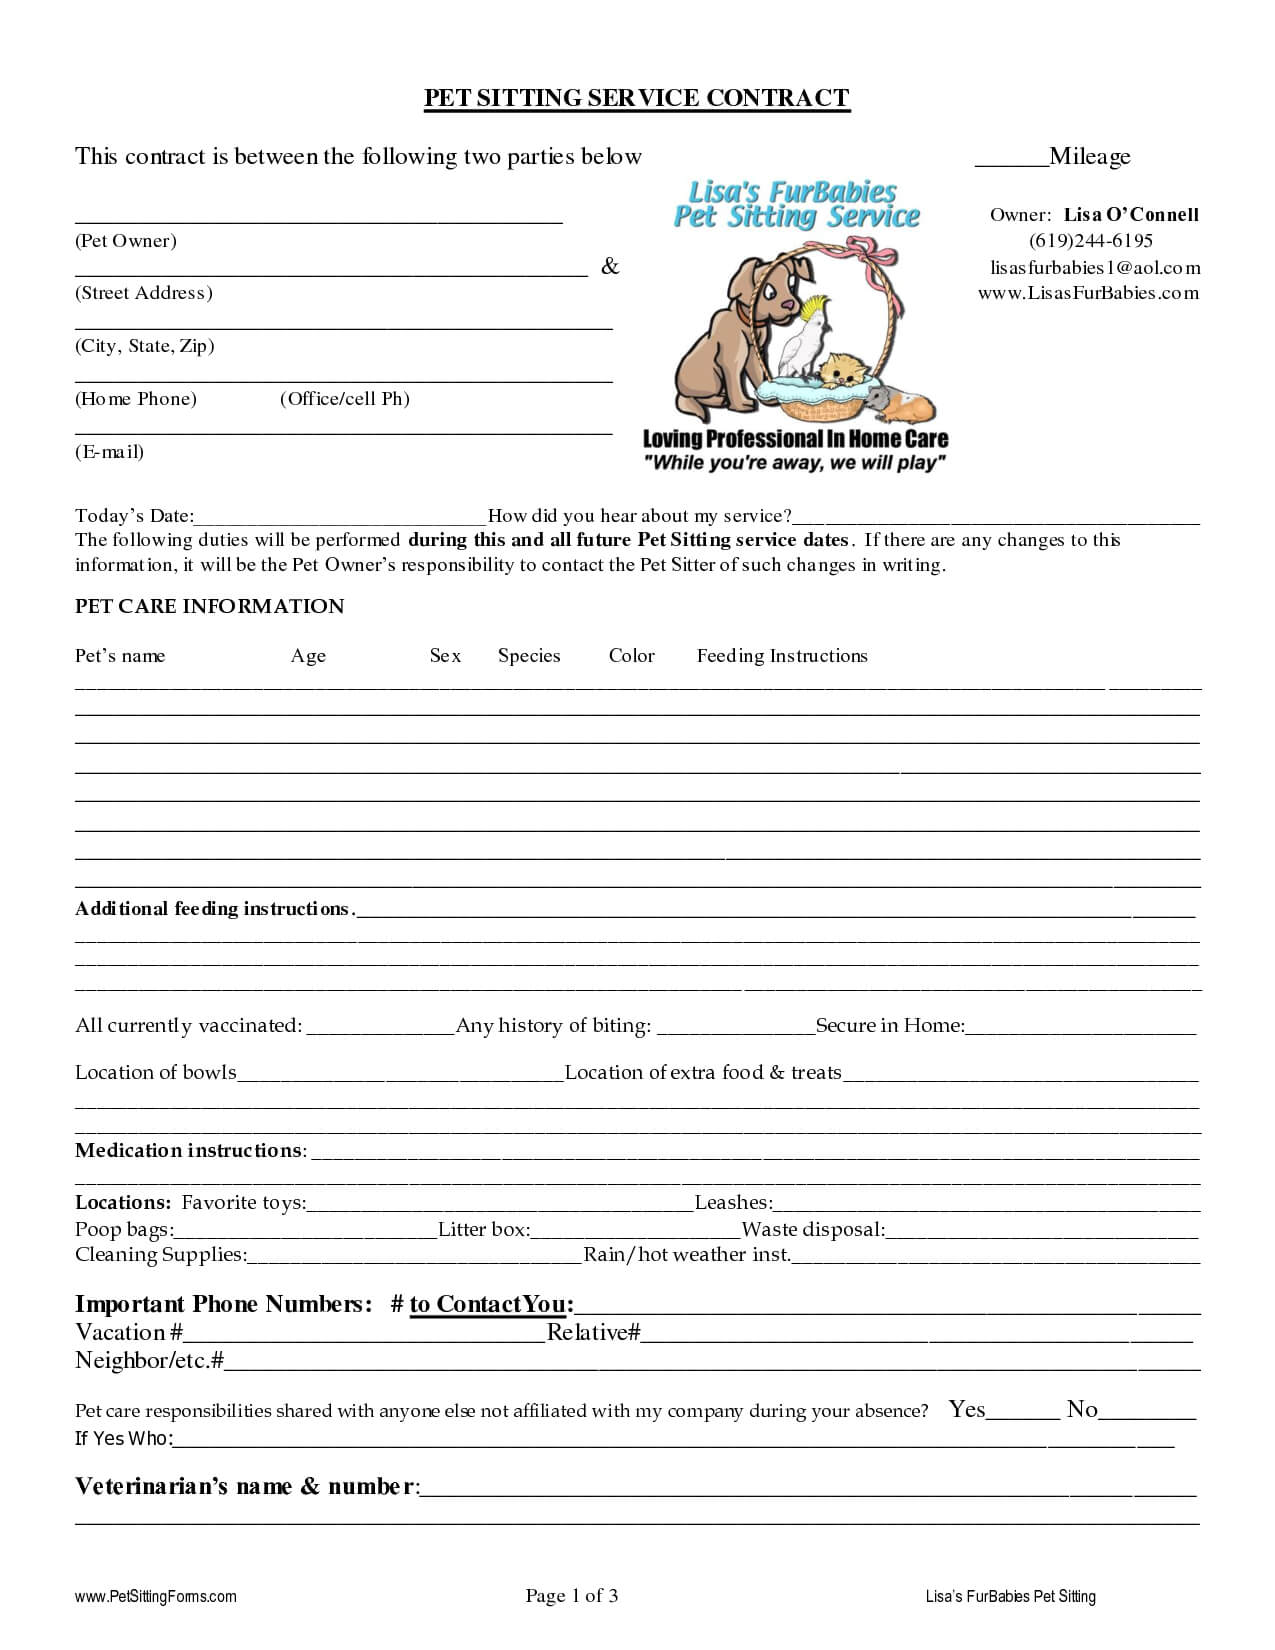 Pet Sitting Contract Templates | Dogs | Pet Sitting Services Regarding Dog Grooming Record Card Template